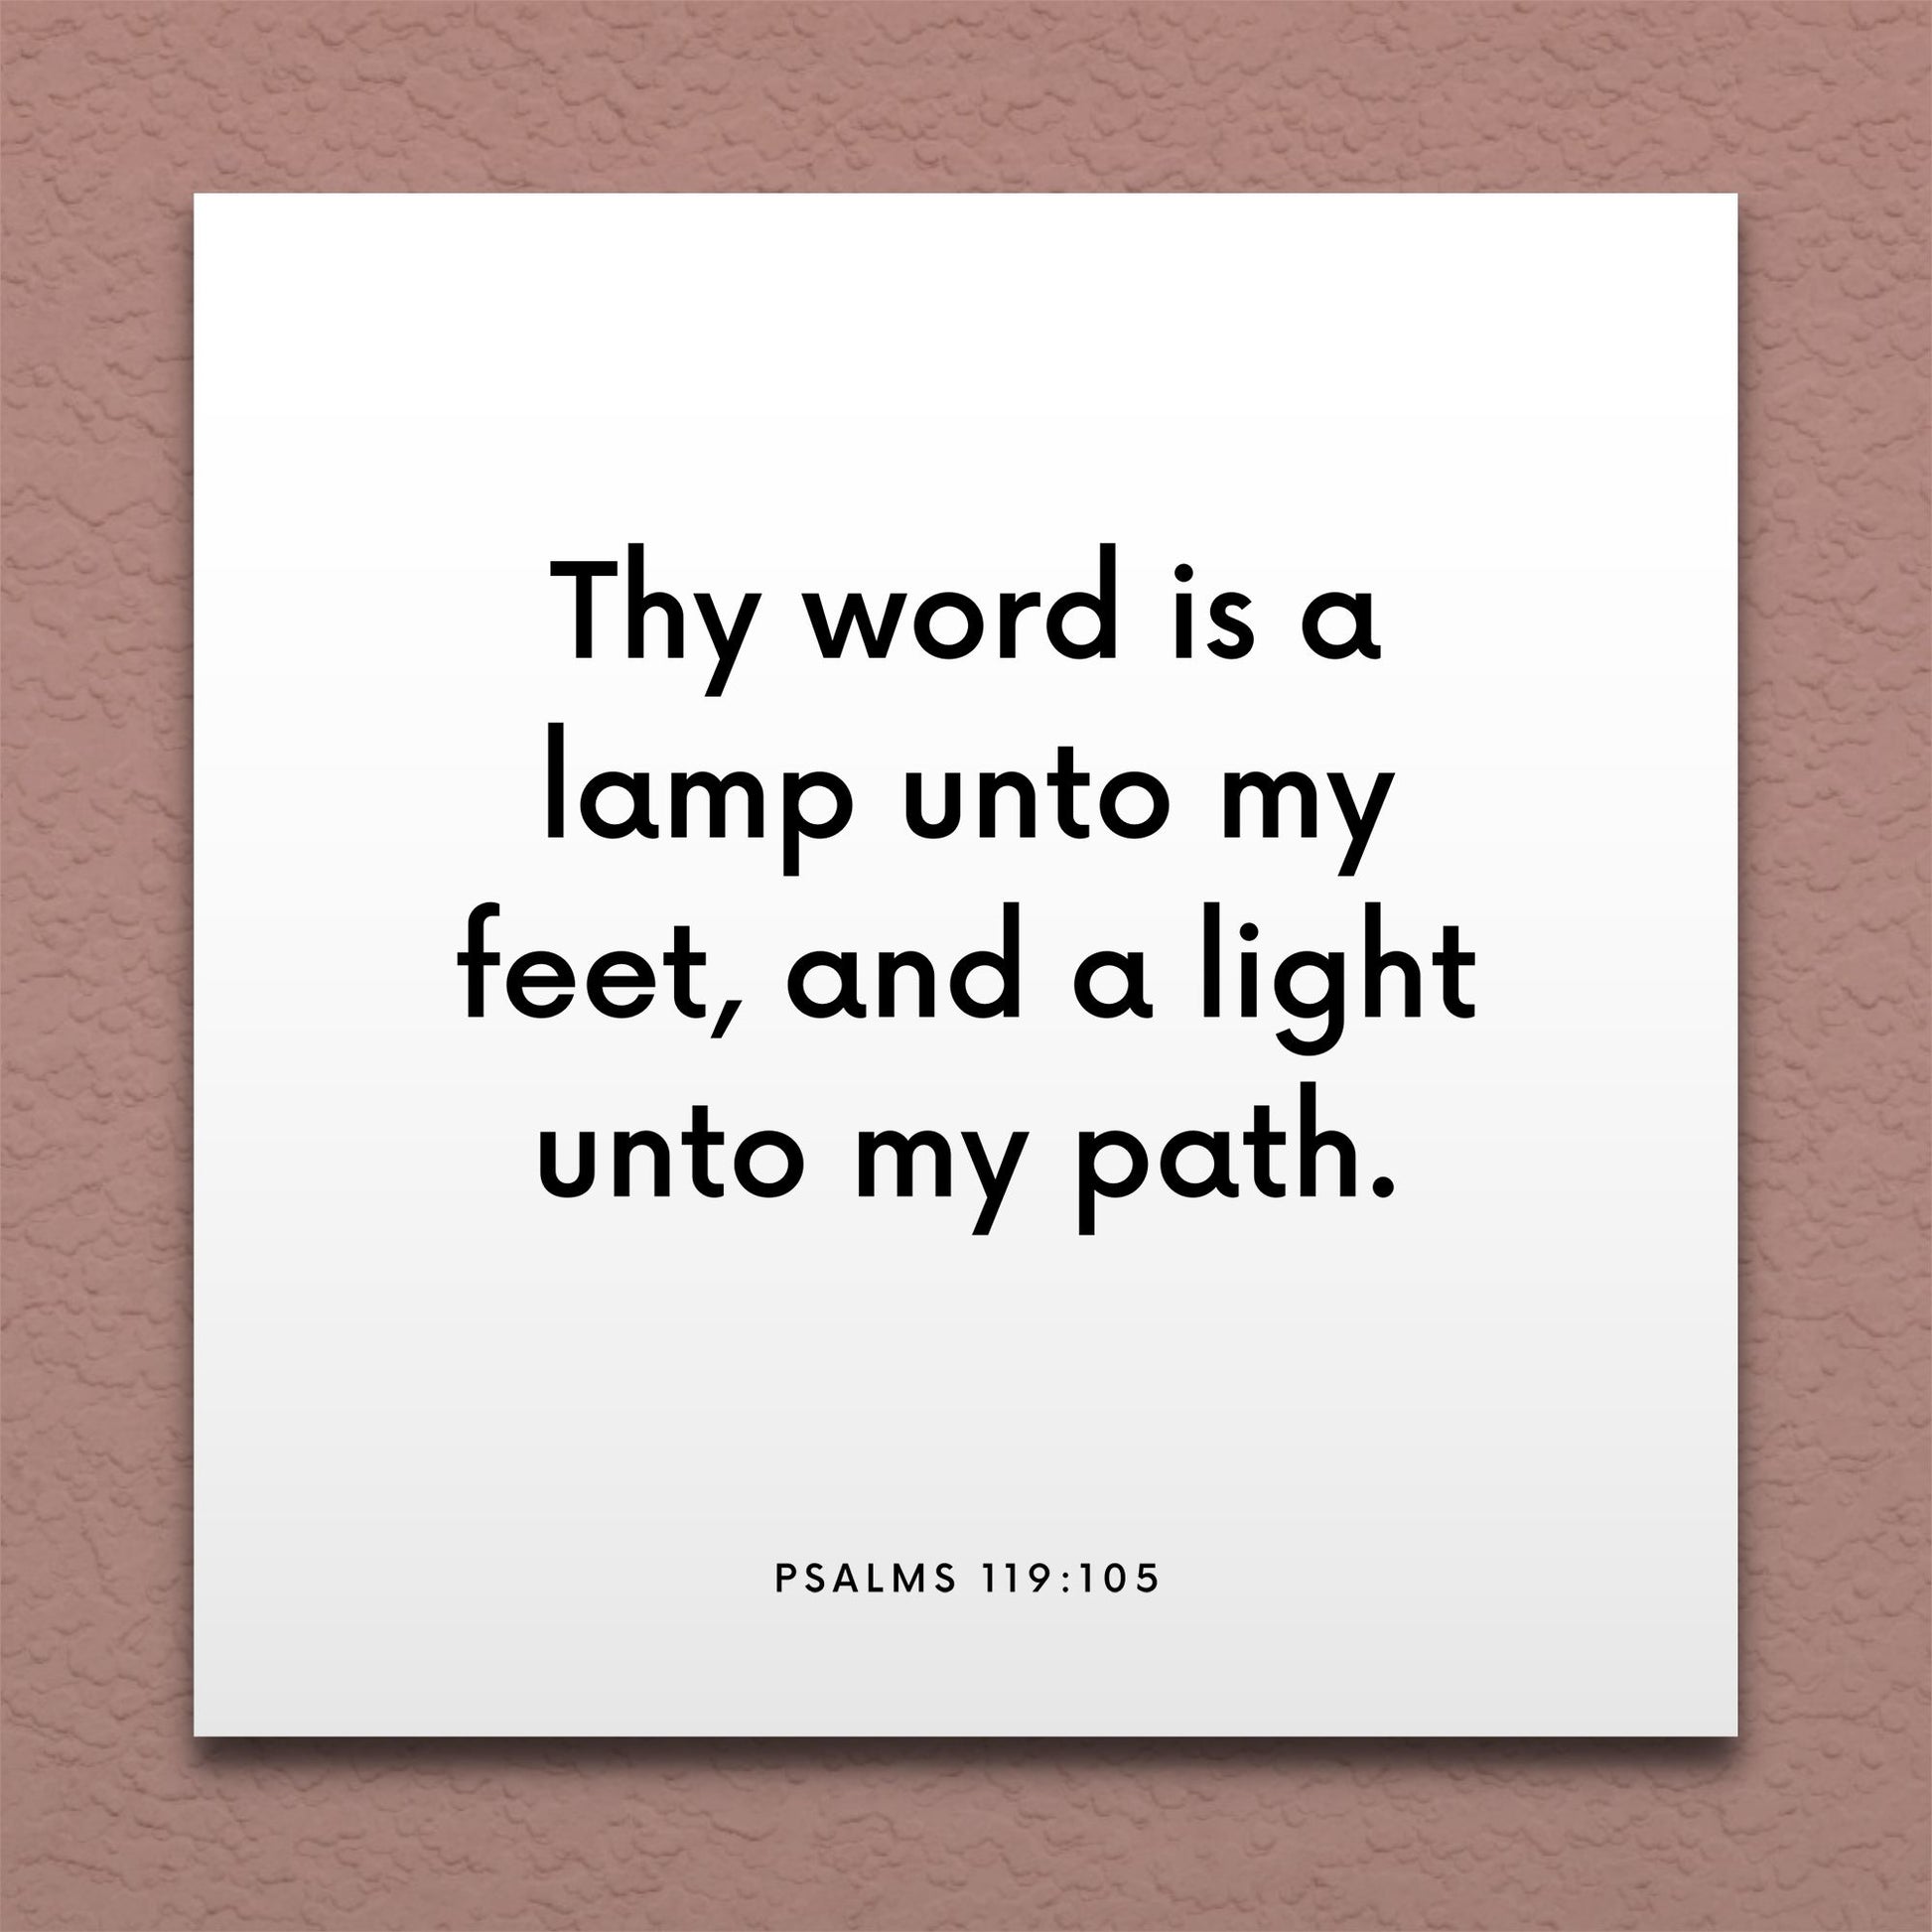 Wall-mounted scripture tile for Psalms 119:105 - "Thy word is a lamp unto my feet, and a light unto my path"